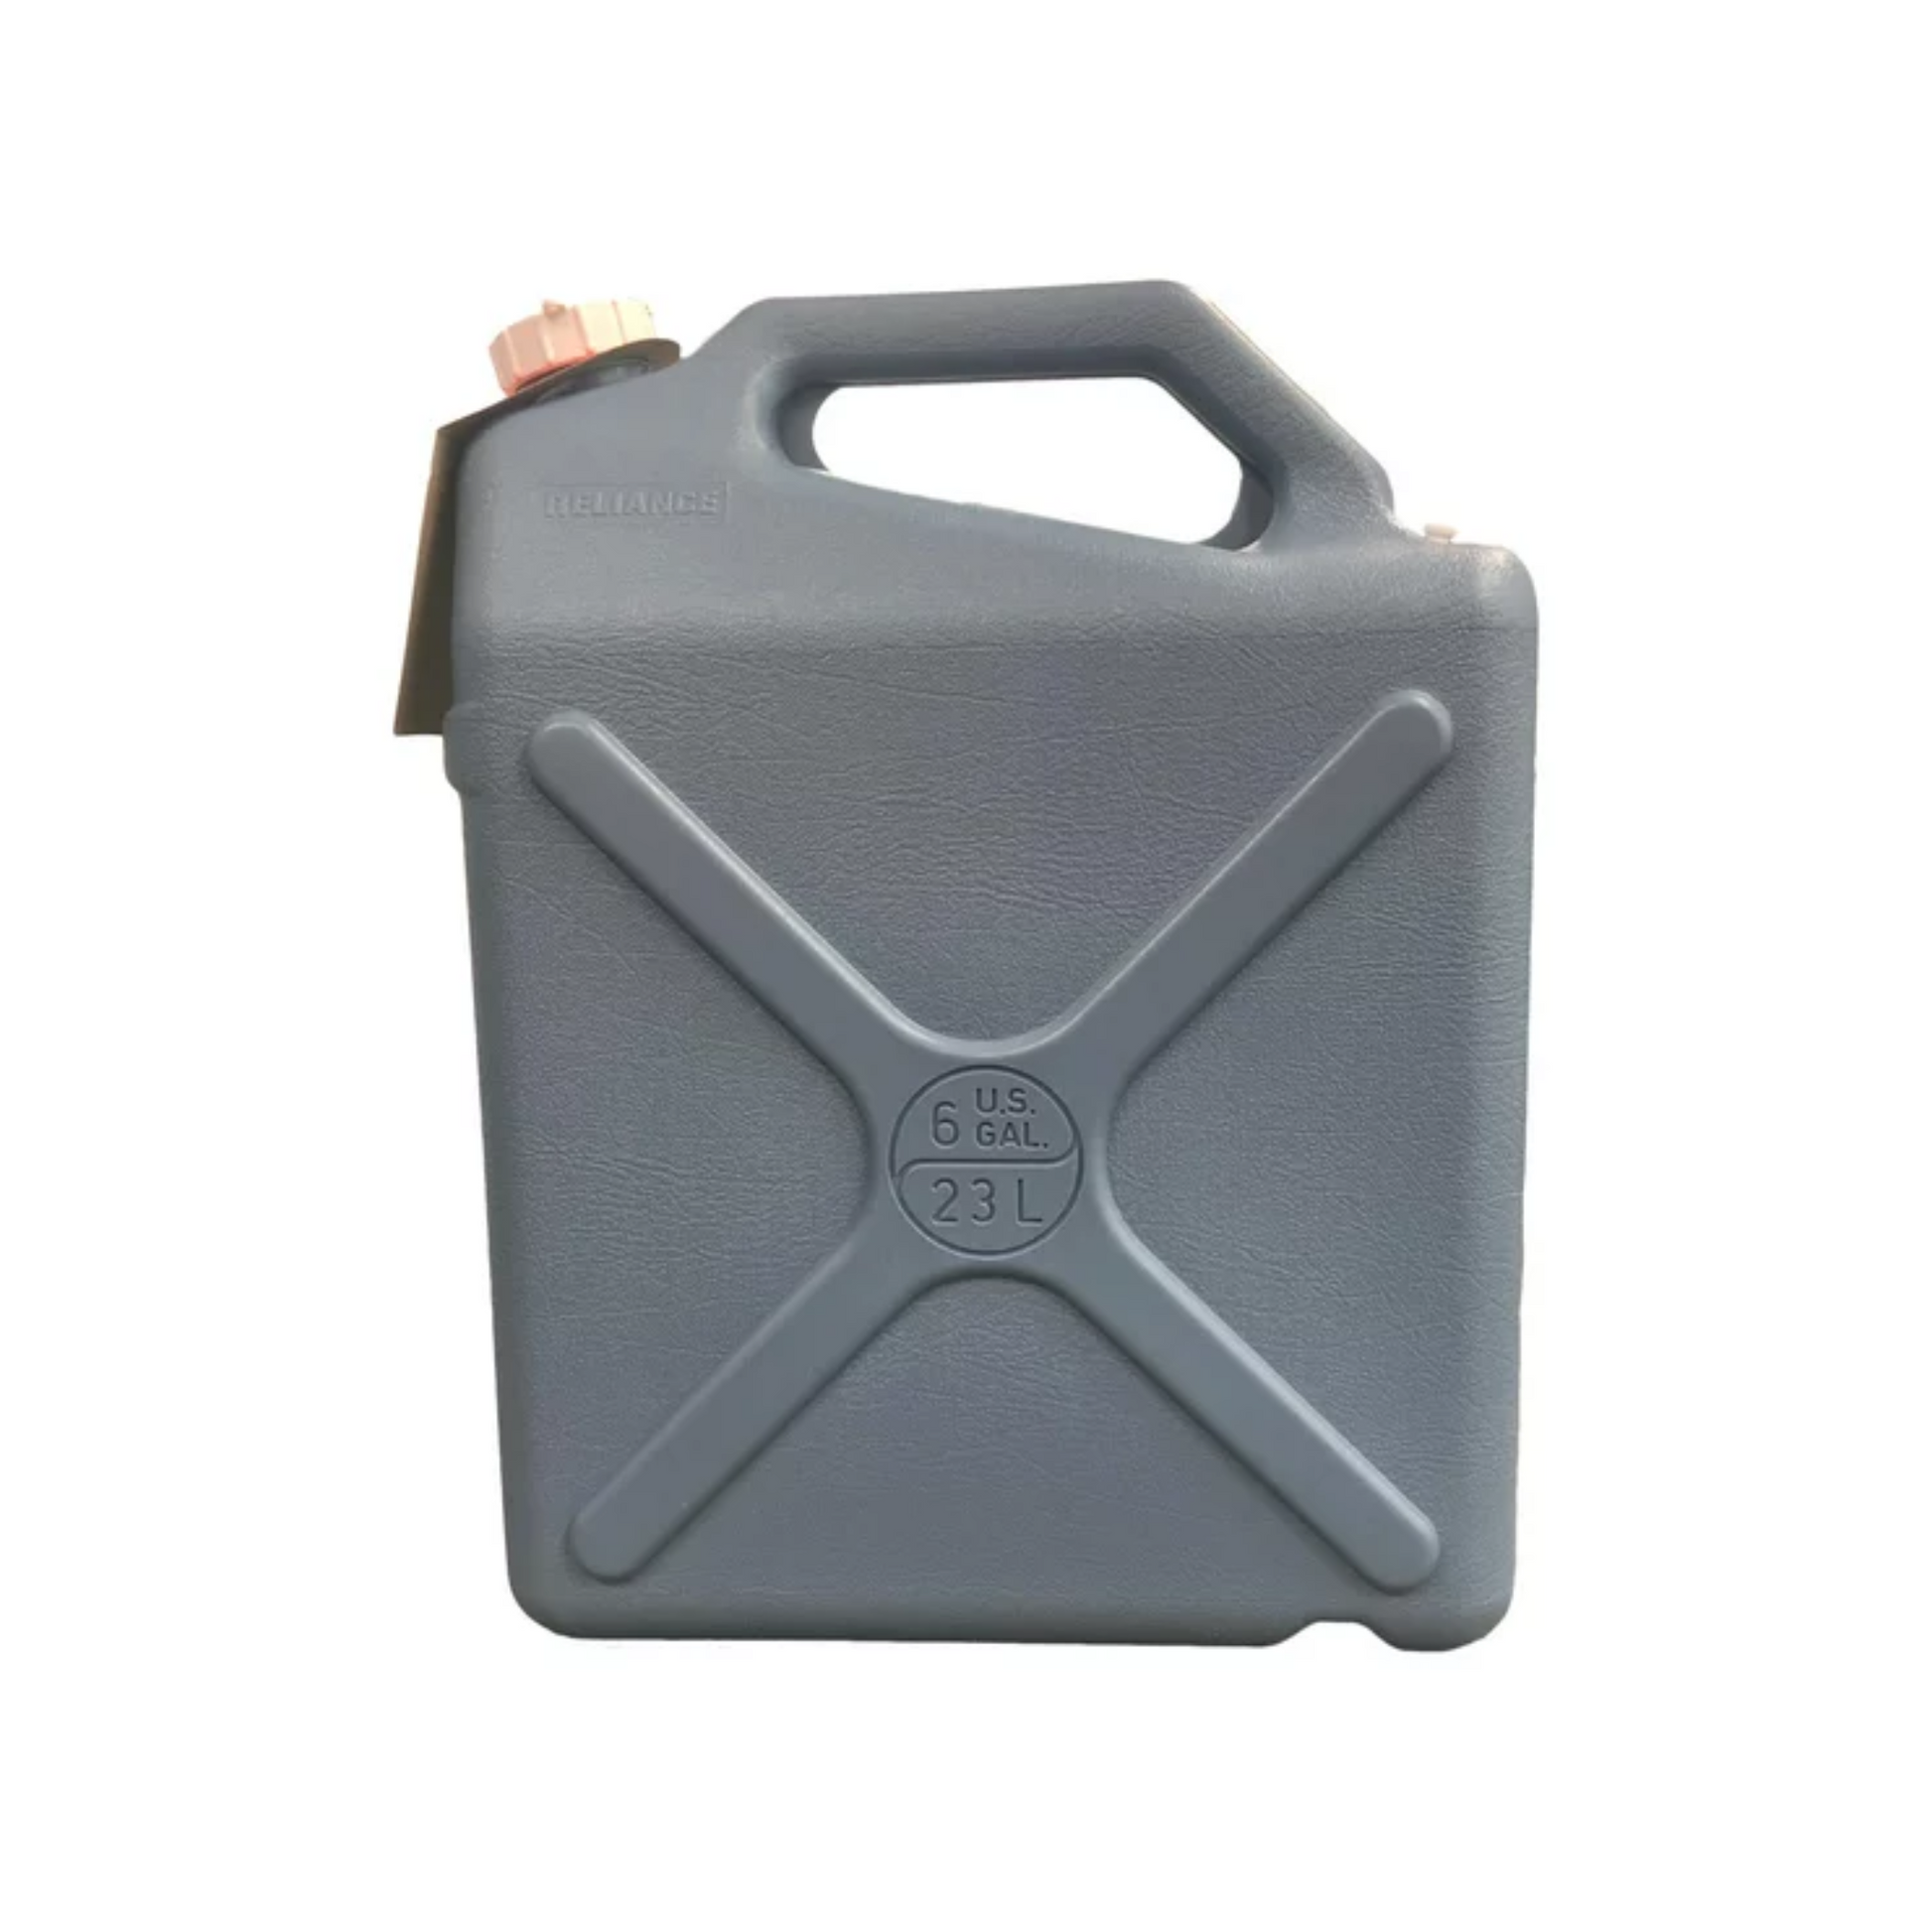 Portable Water Jug - Ozark 6-Gal - Convenient Handle and Spout for Easy Pouring